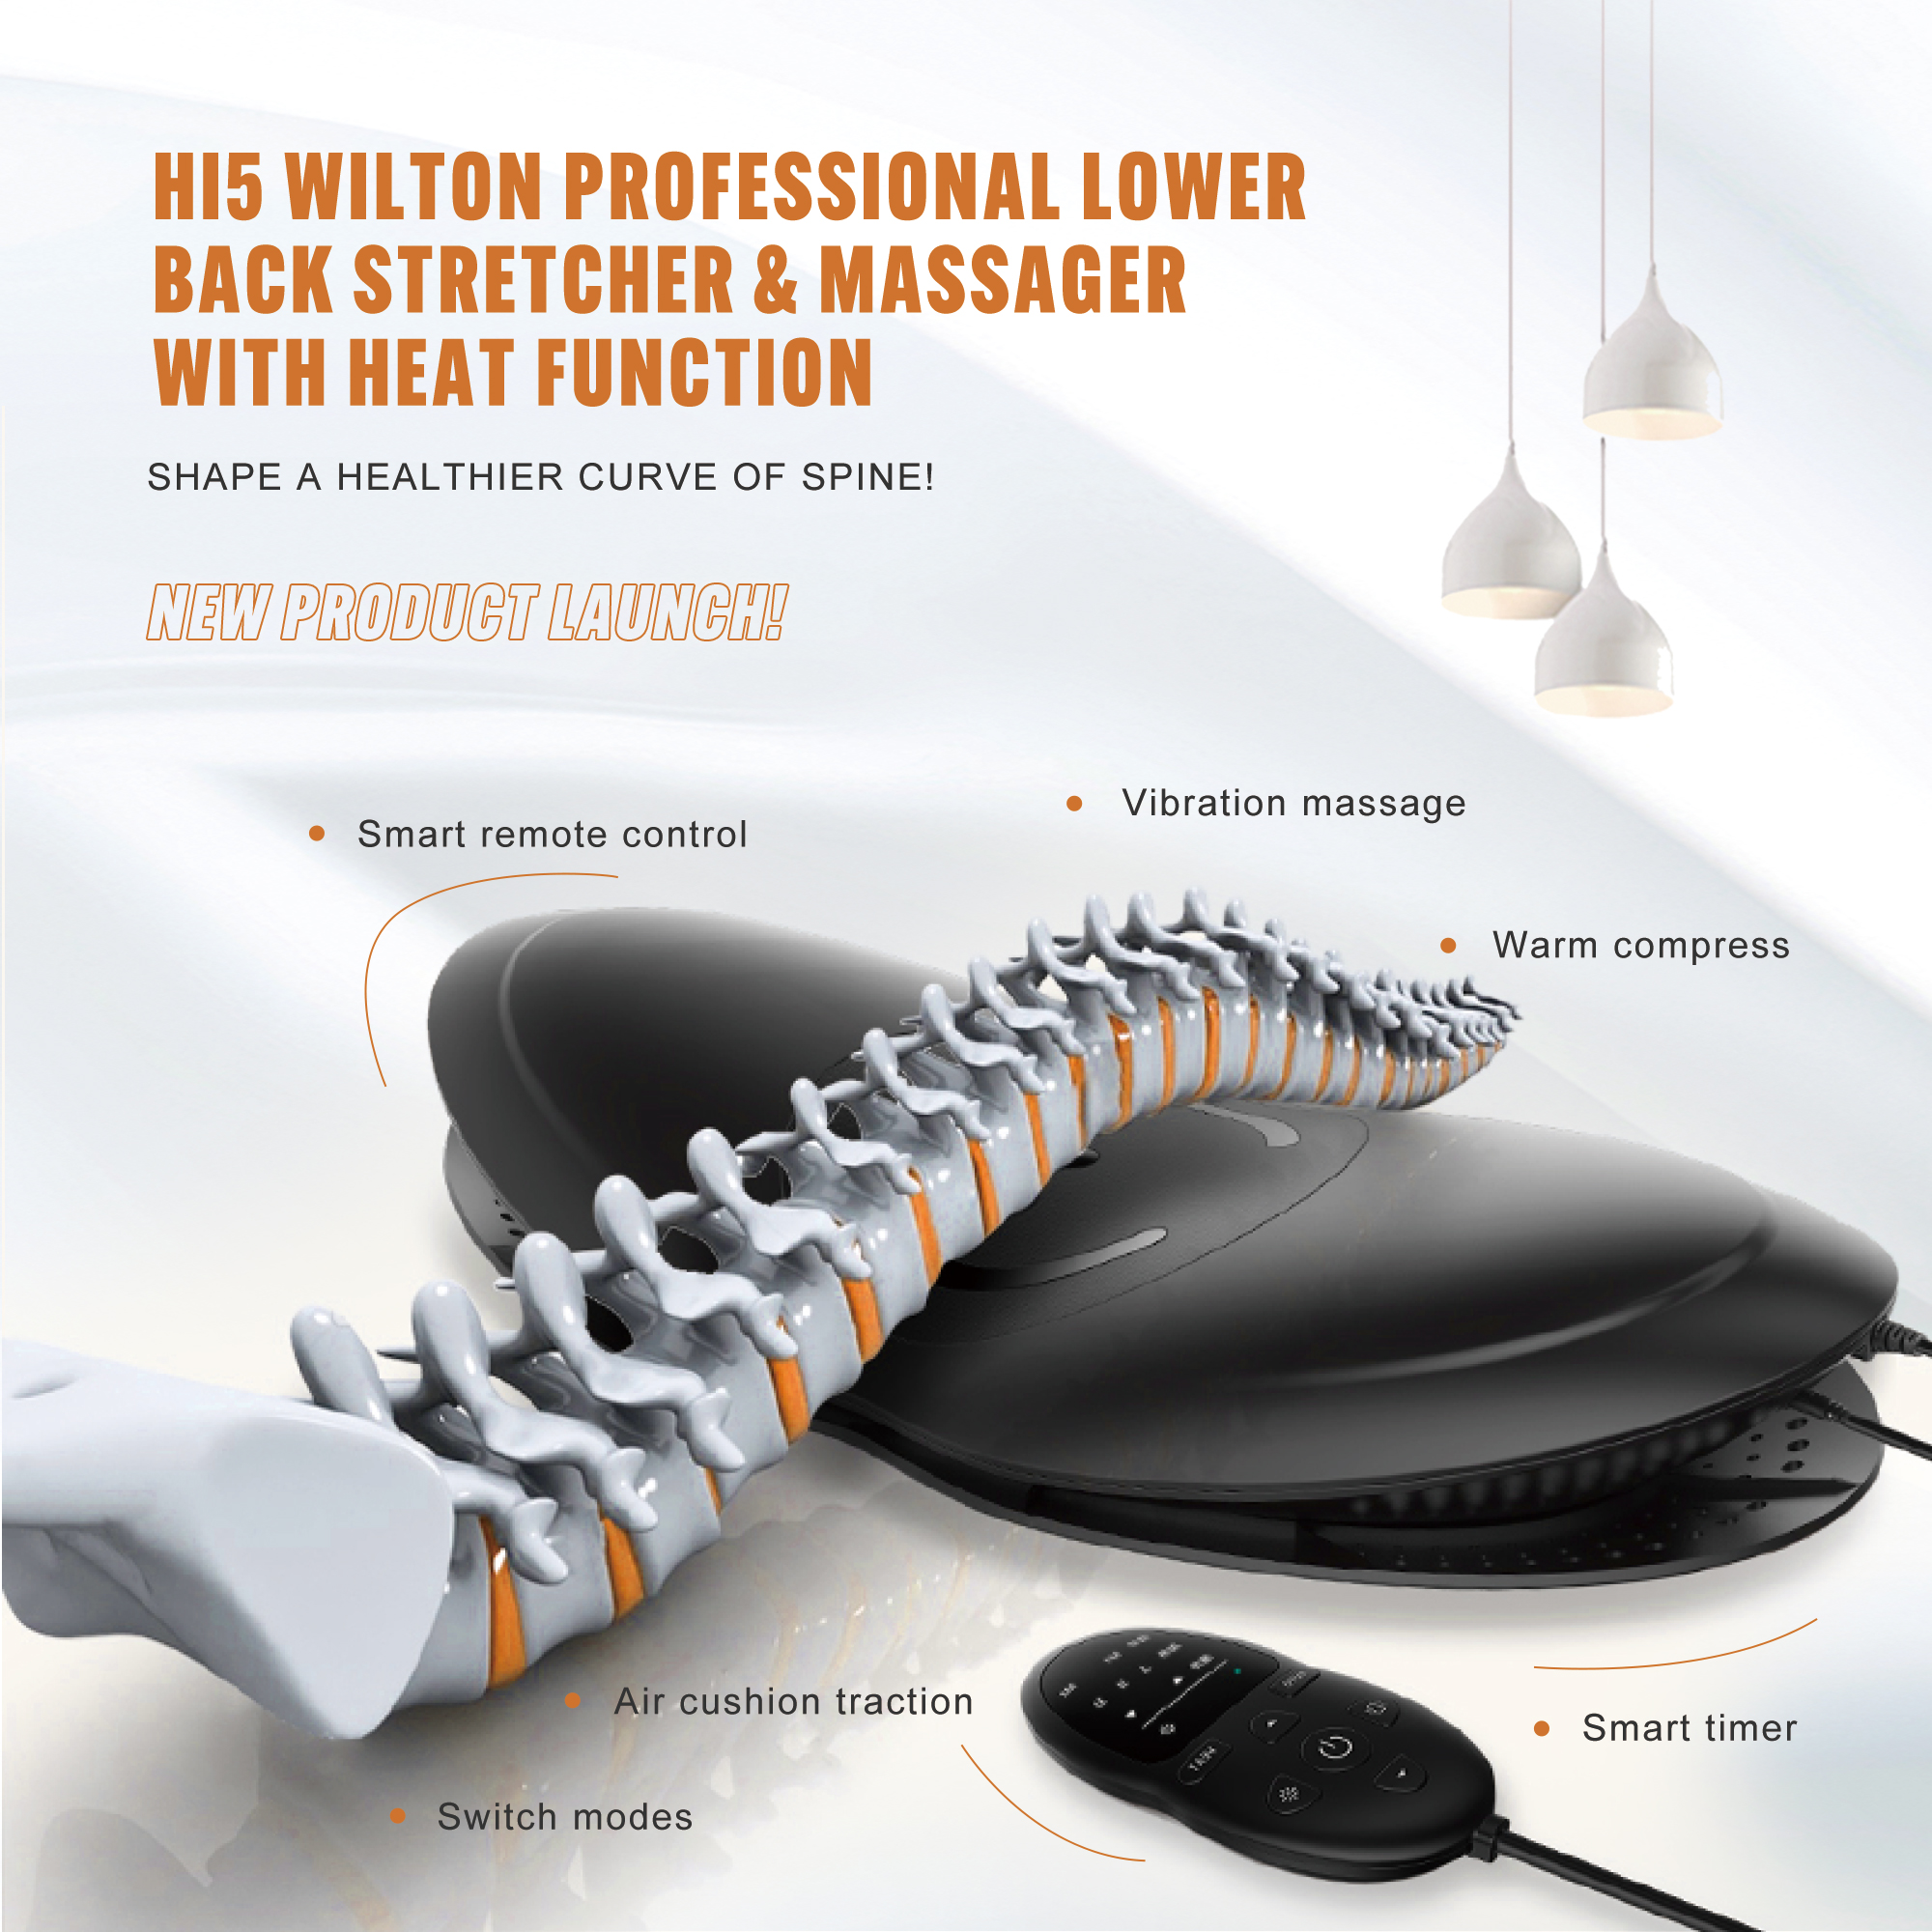 New product launch! Hi5 Wilton Professional Lower Back Stretcher & Massager with Heat Function